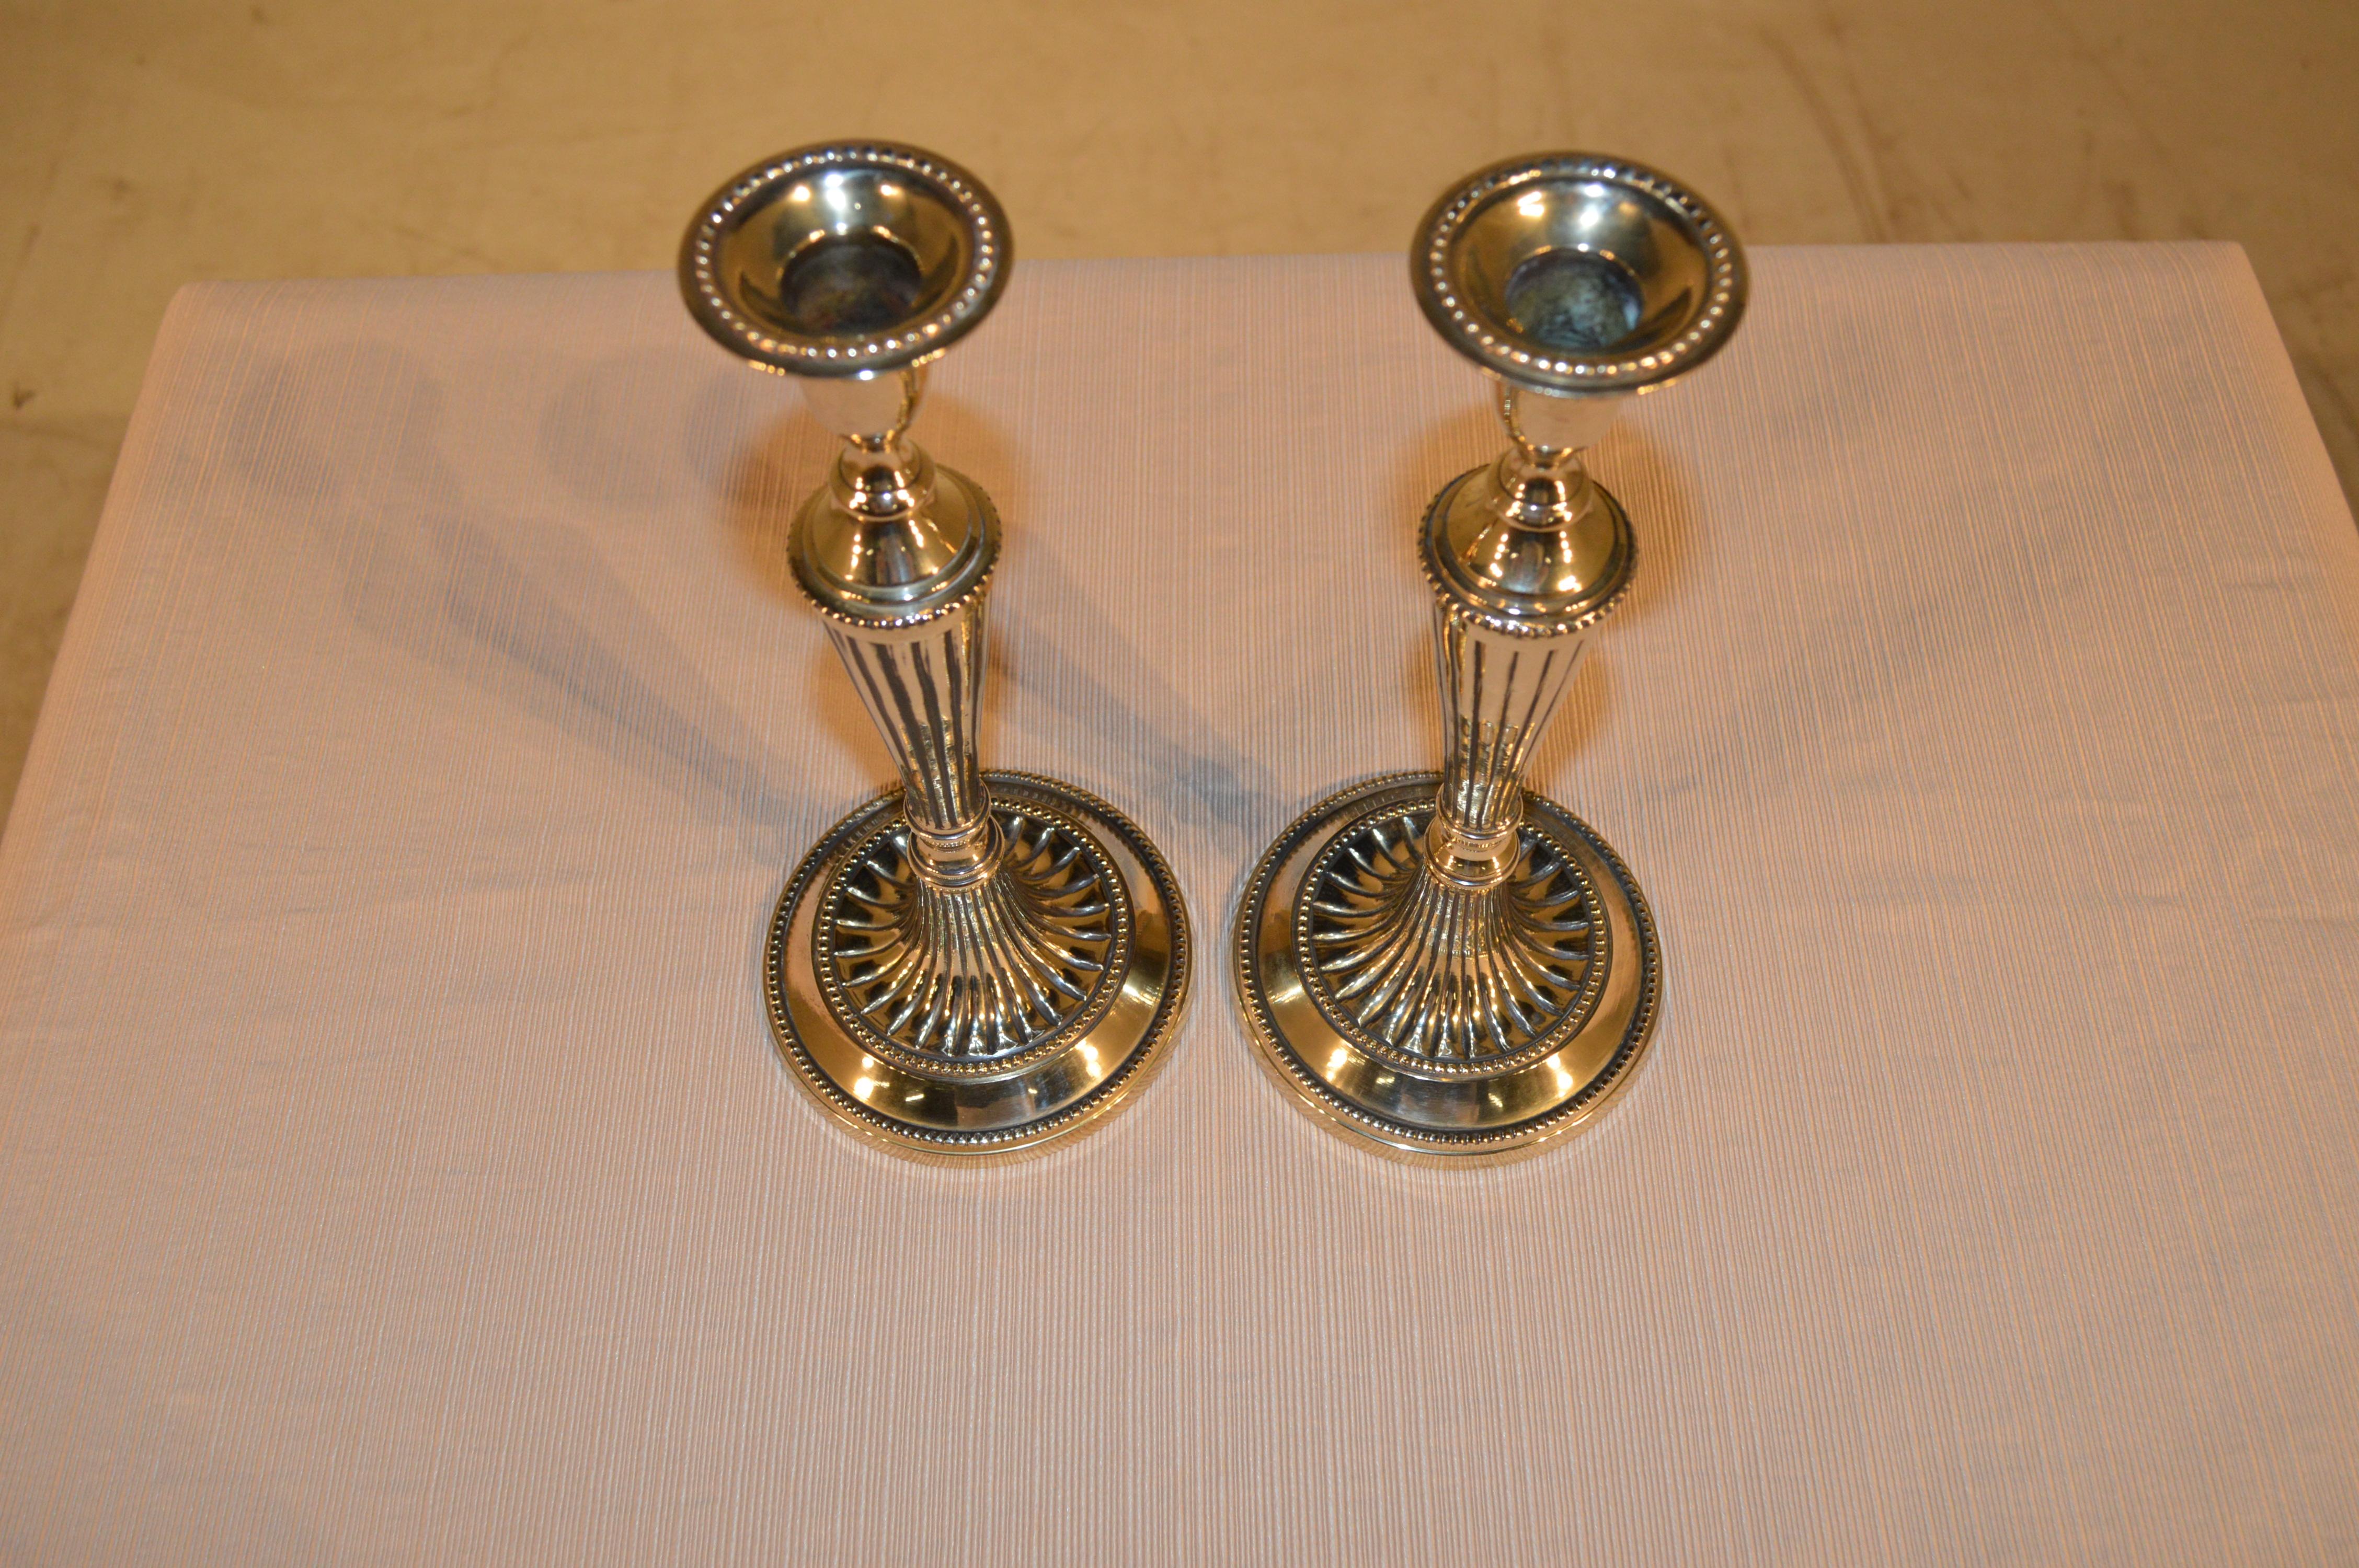 Late-18th century pair of Georgian brass candlesticks. They are hand cast and have lovely tulip-shaped candle cups following down to gracefully reeded stems and highly detailed bases.